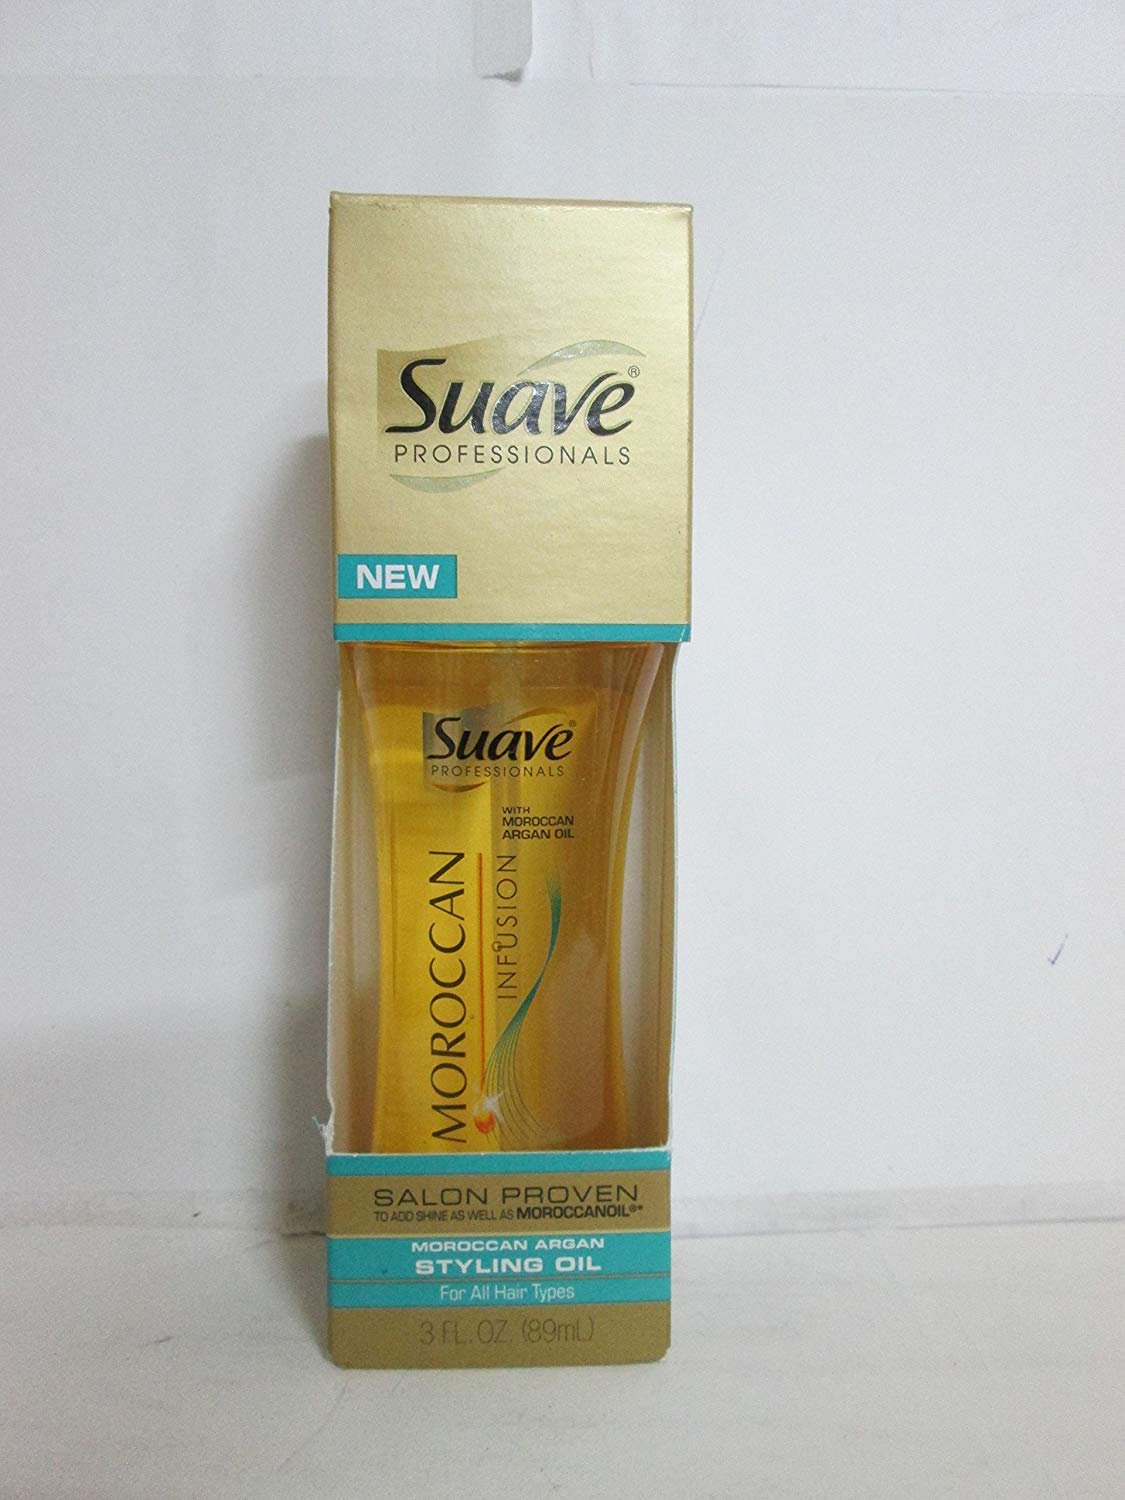 Suave Professionals Moroccan Argan Styling Oil - image 1 of 2